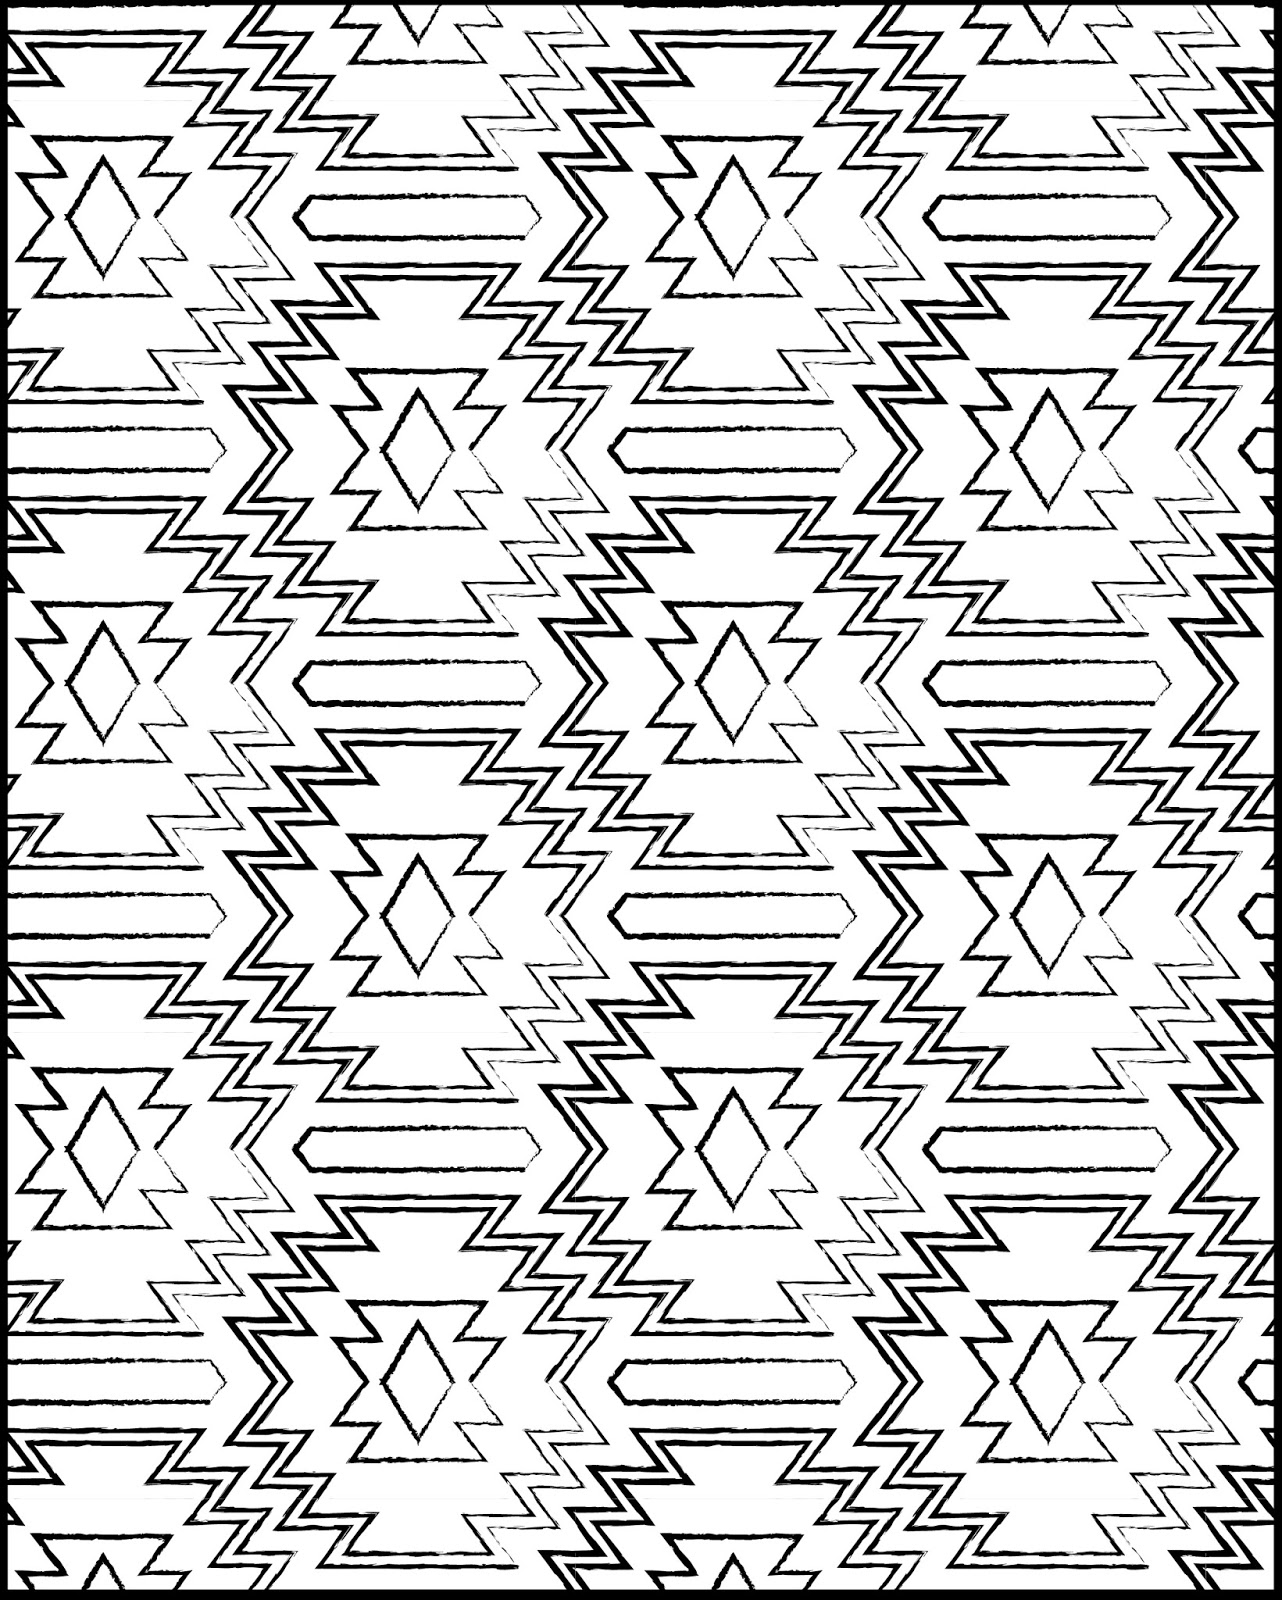 Fun GEO Patterns to Print & Color!